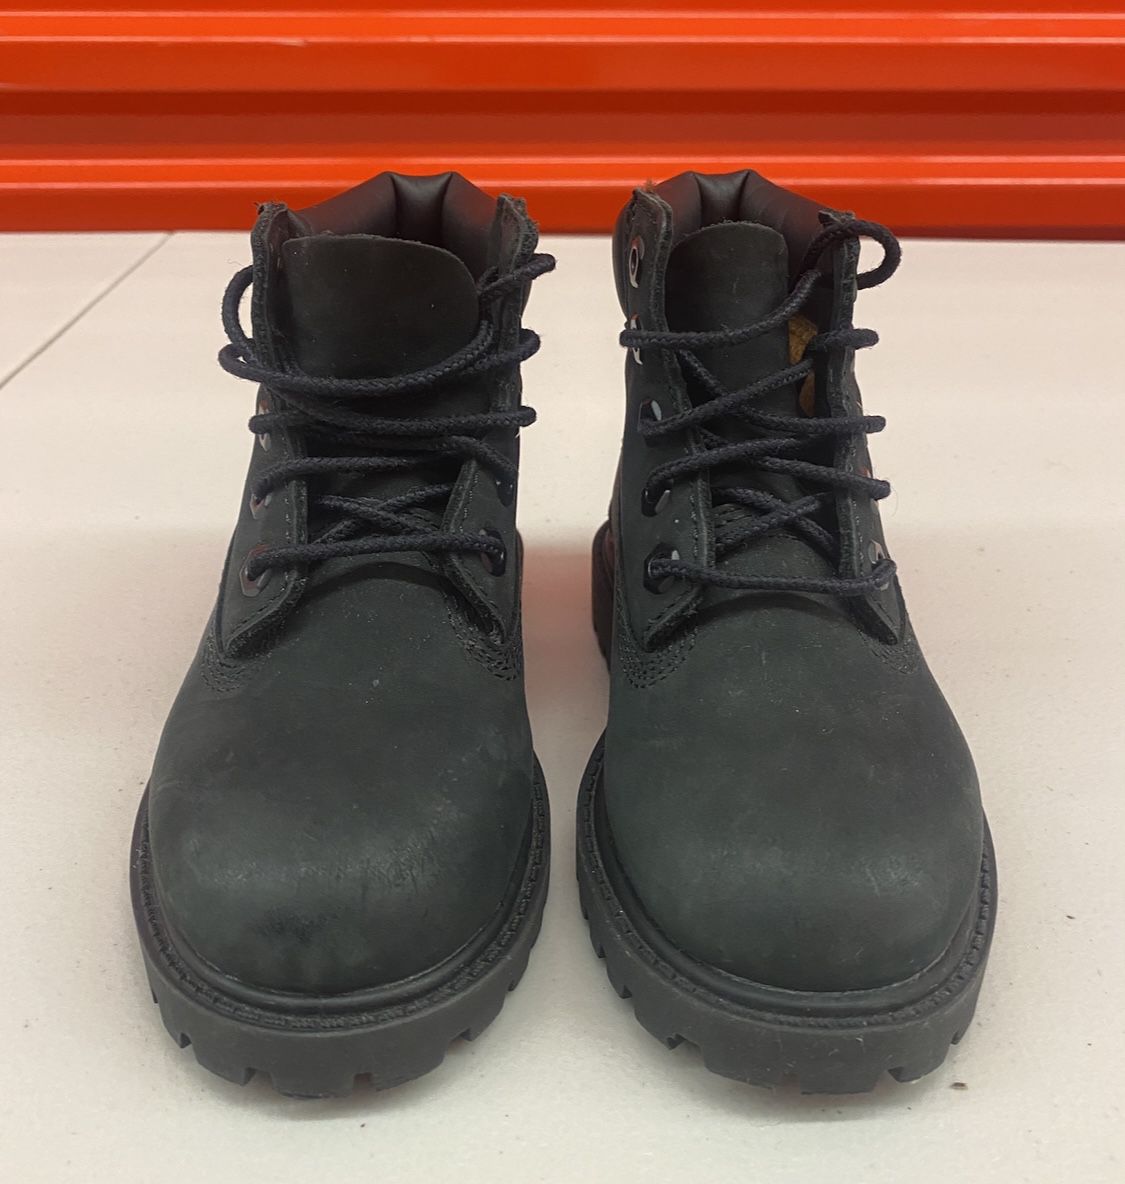 Toddler Timberlands Size 8 For $45